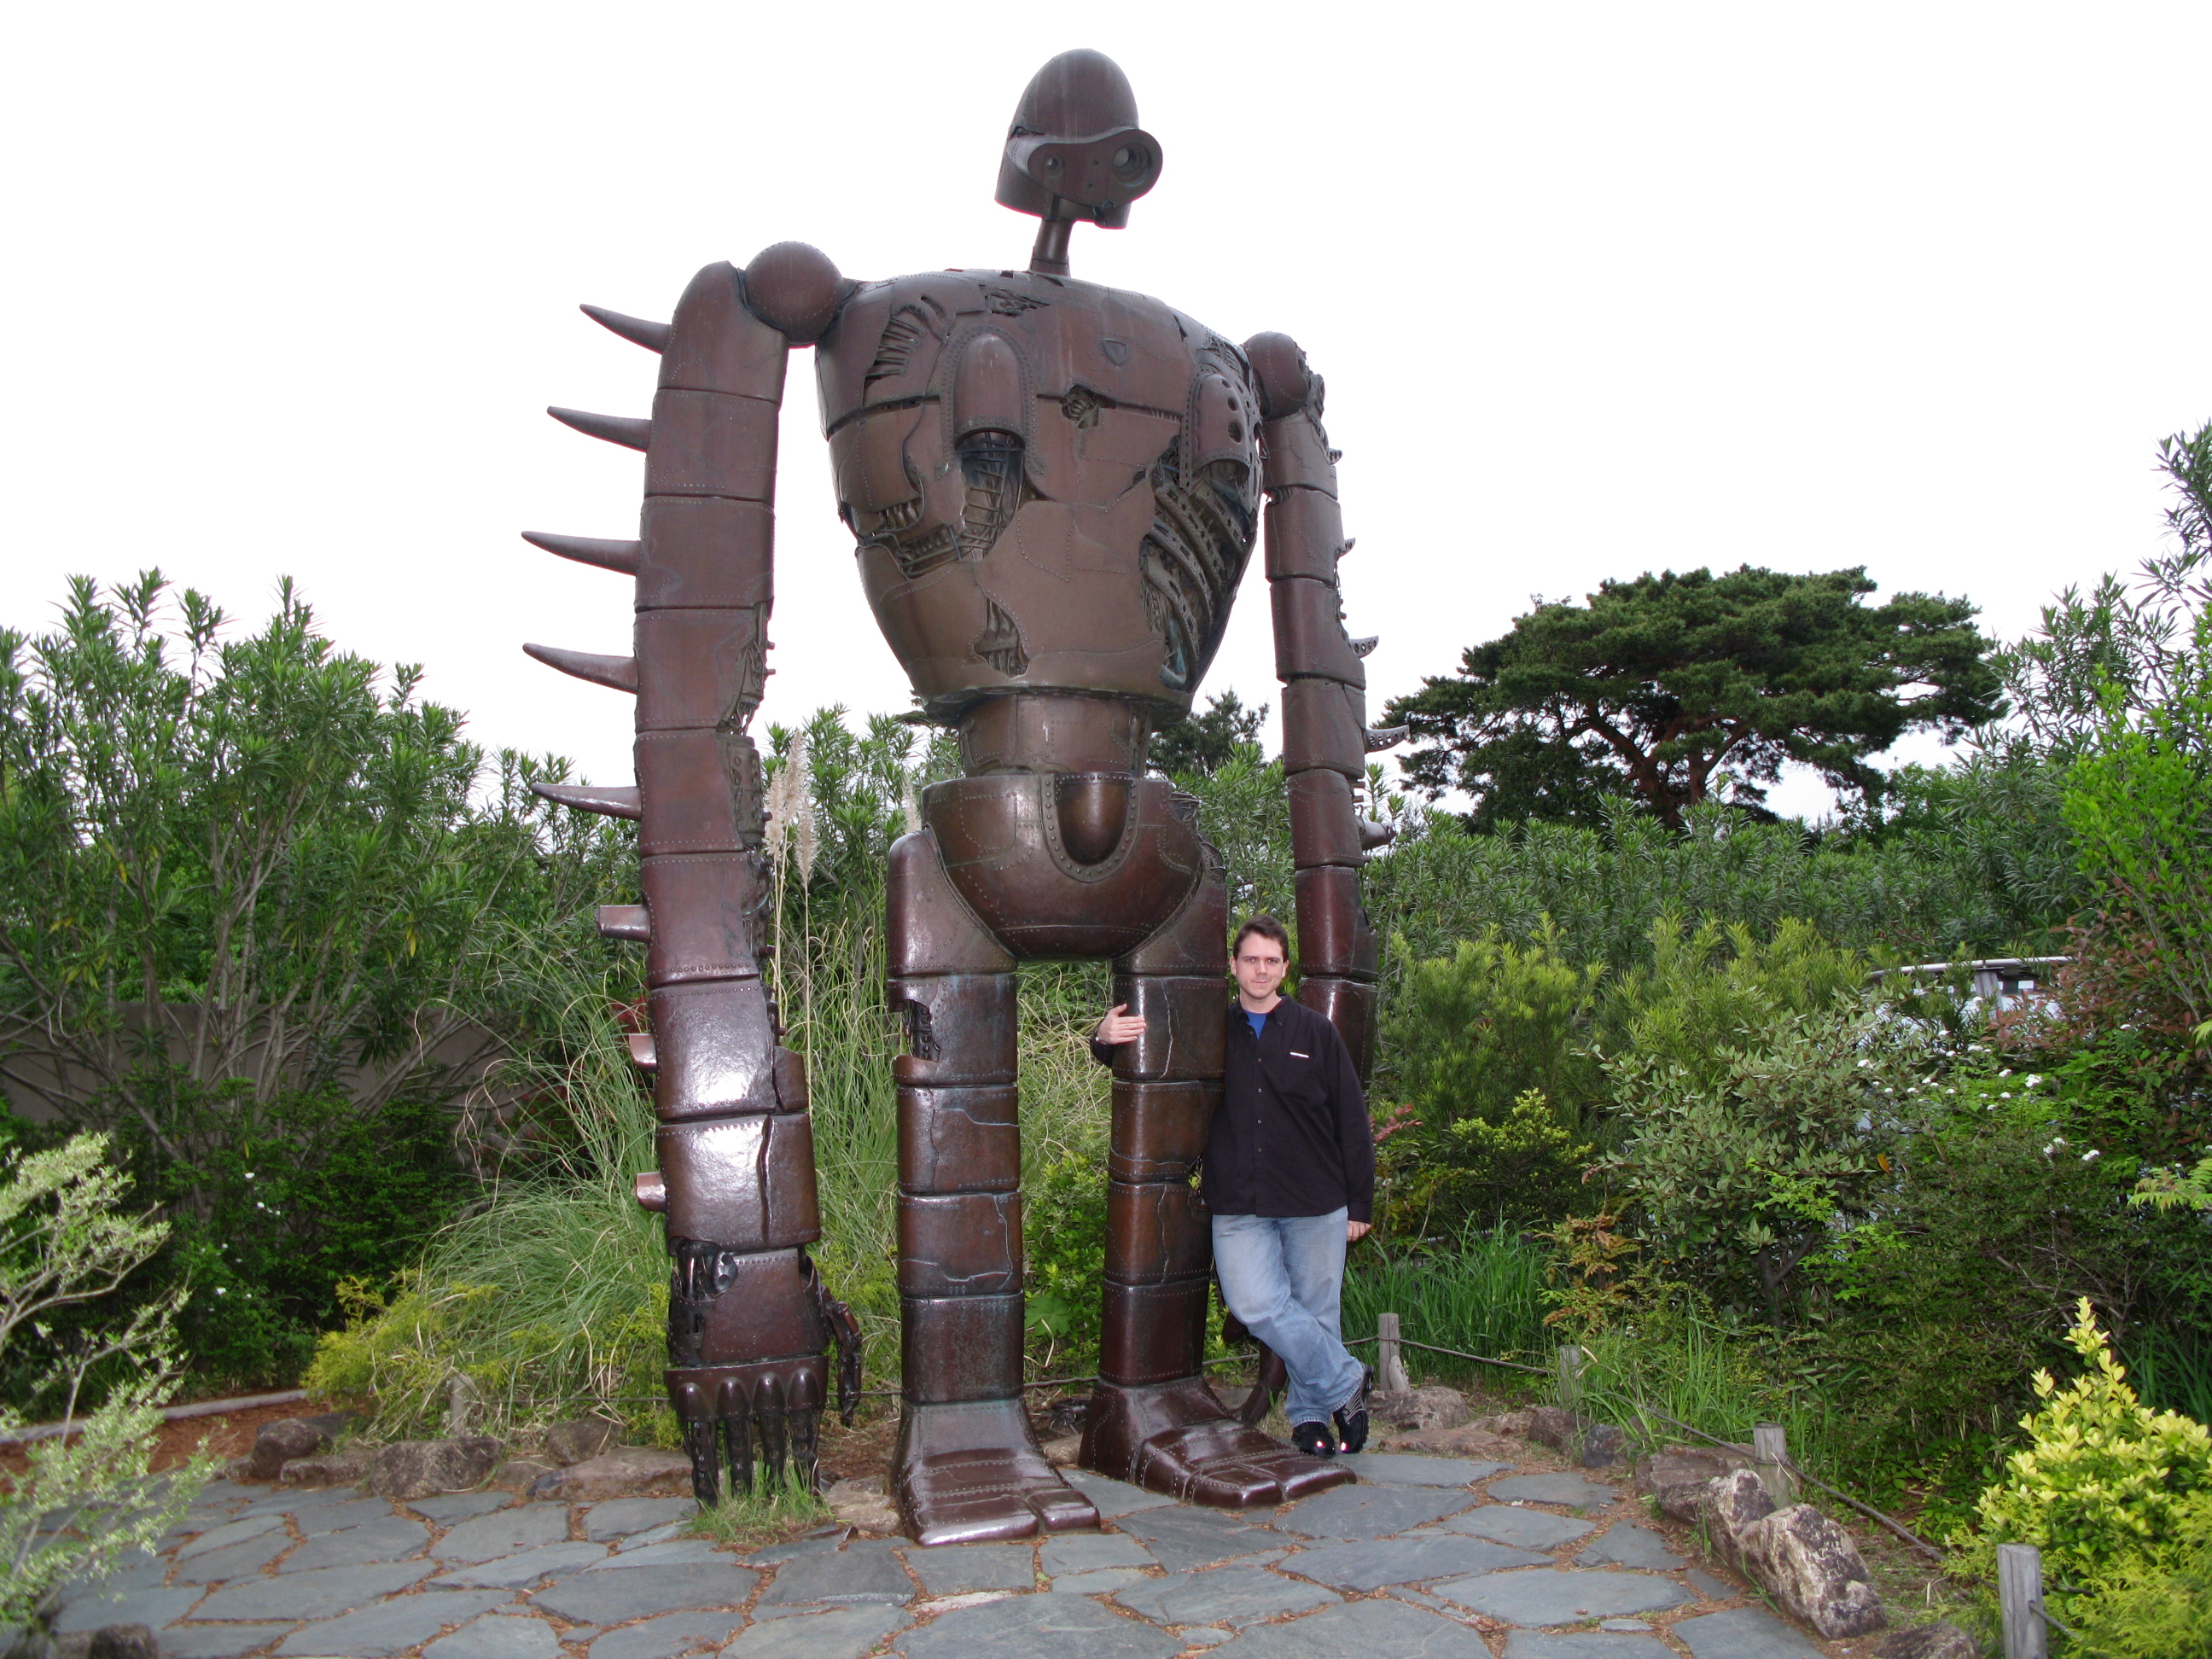 Standing with the Laputa Robot ontop the the Ghibli Studios